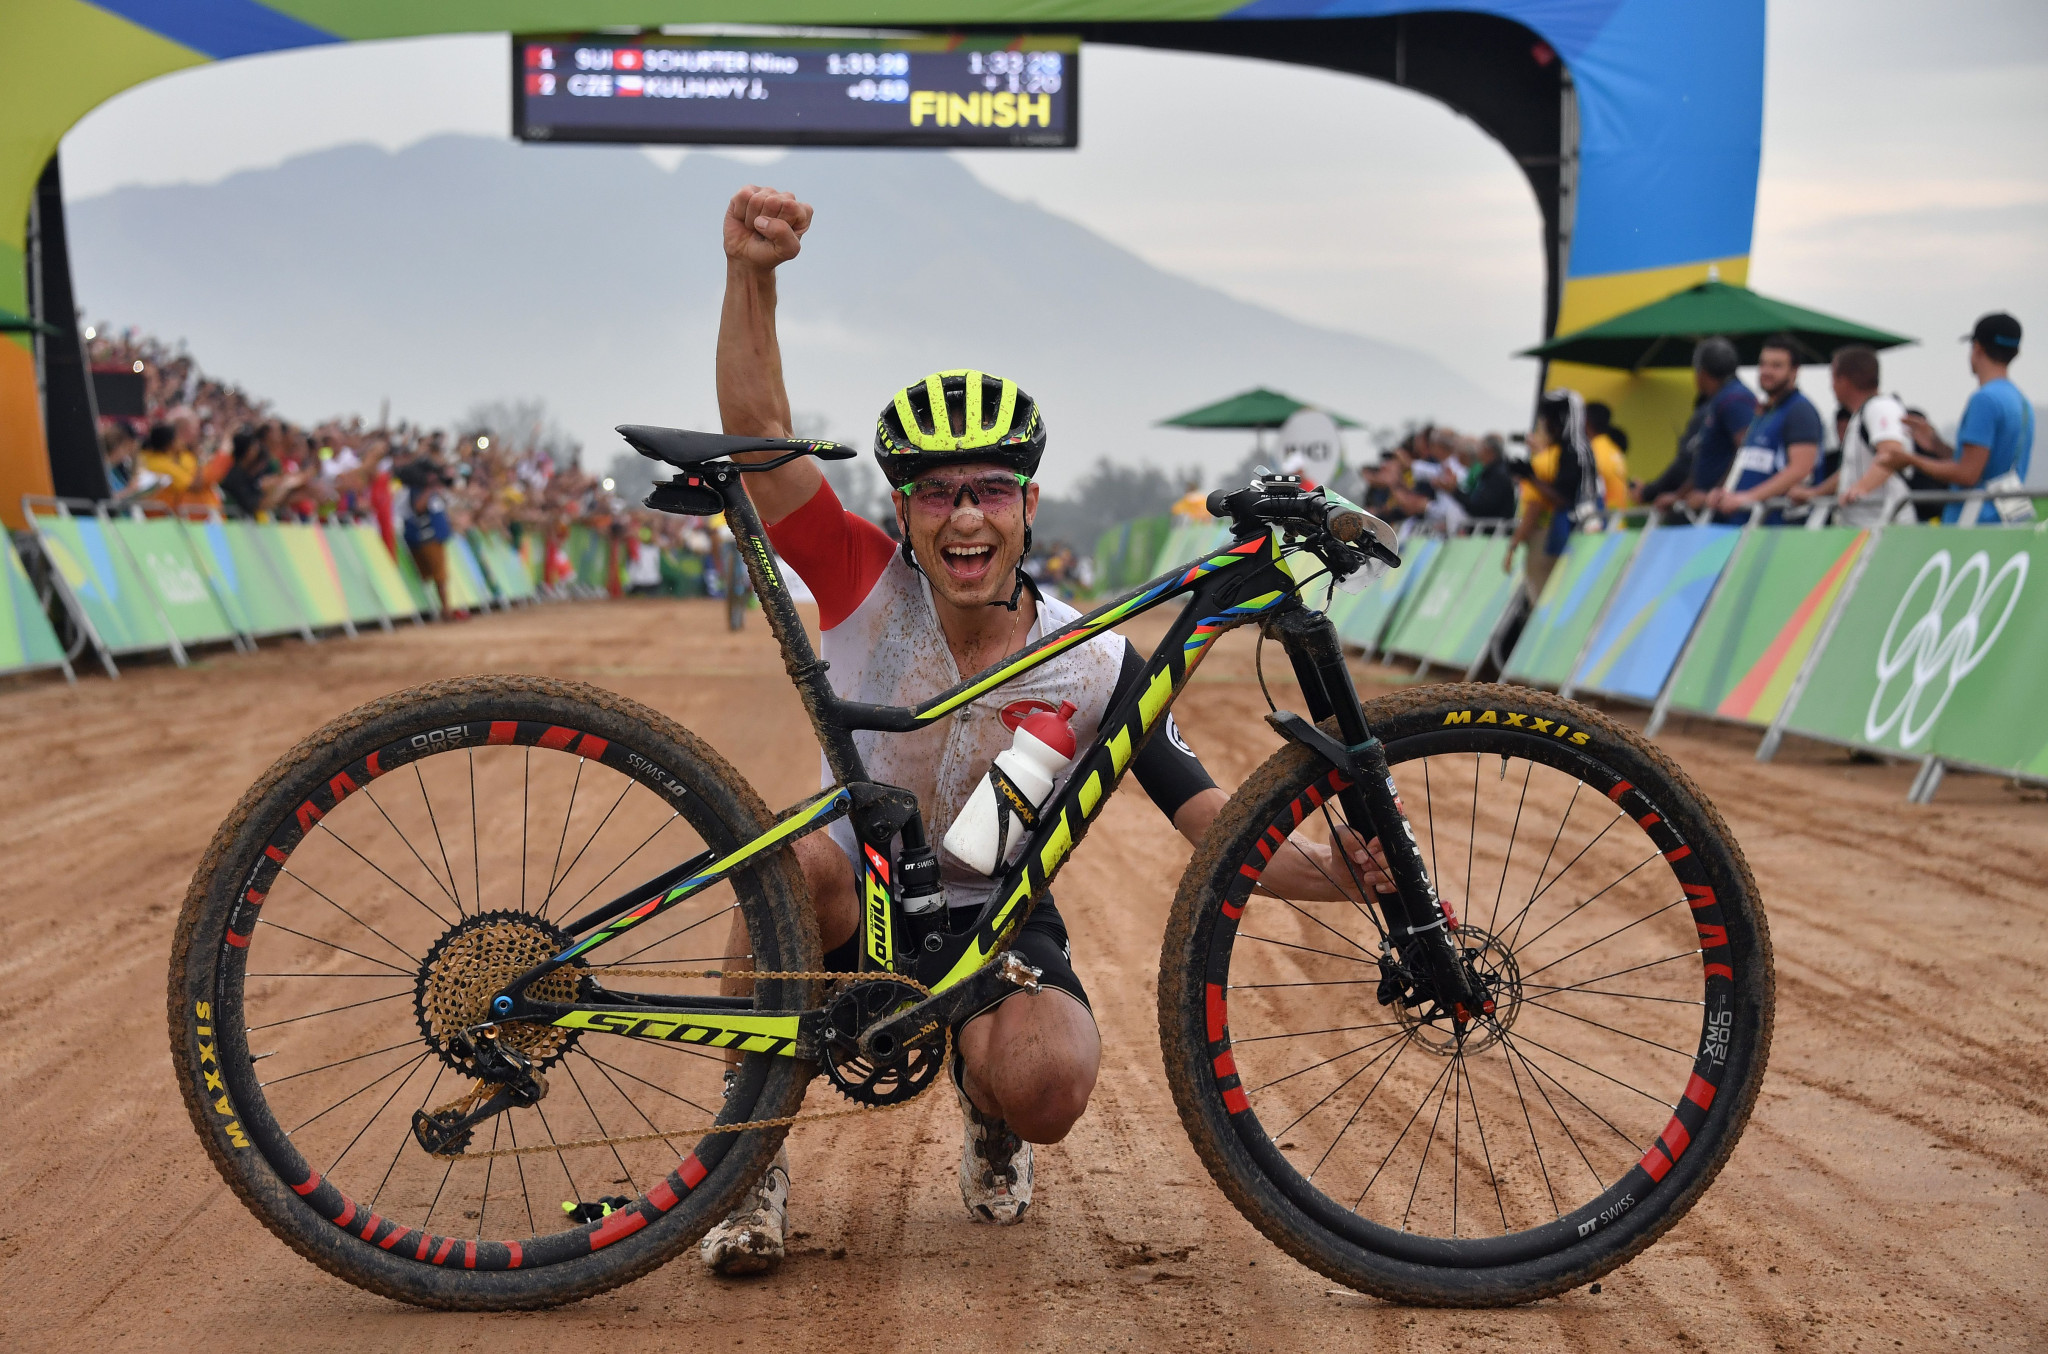 Nino Schurter is seeking to cap a perfect season with success in Cairns ©Getty Images